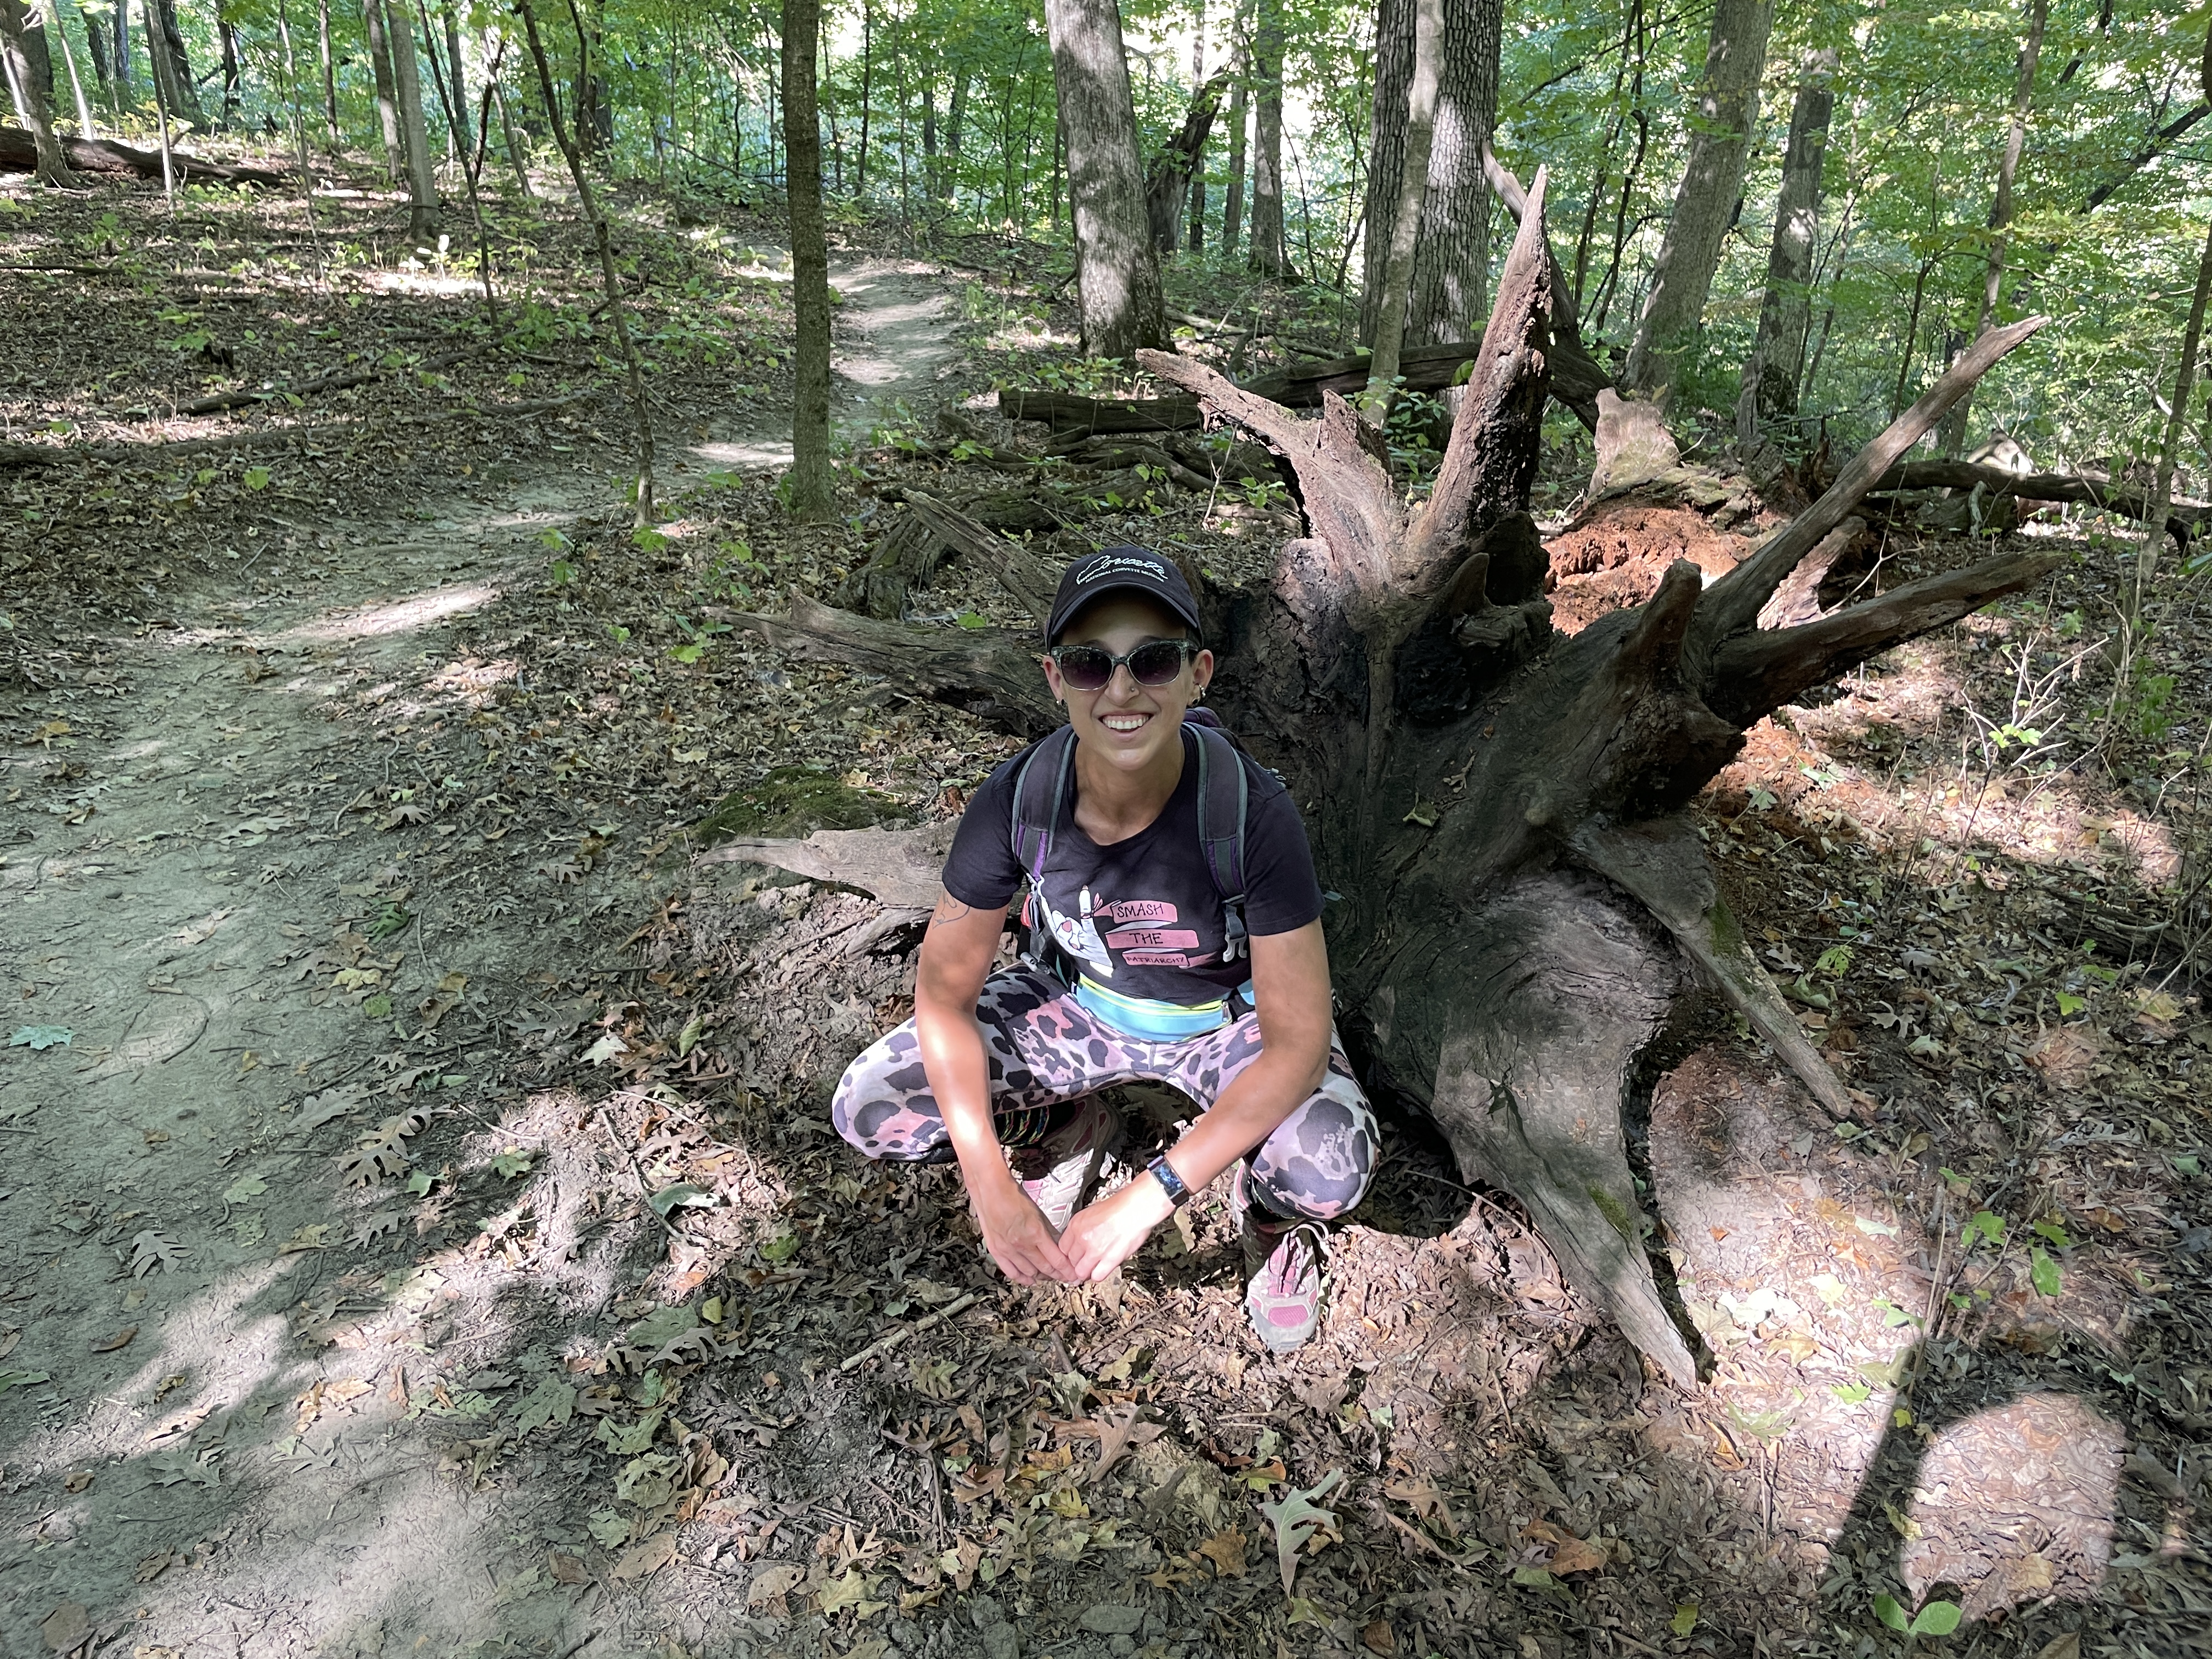 Photo the author, Mara, crouching in front of the roots of a fallen tree and next to the trail. Main colors in the photo are browns. 